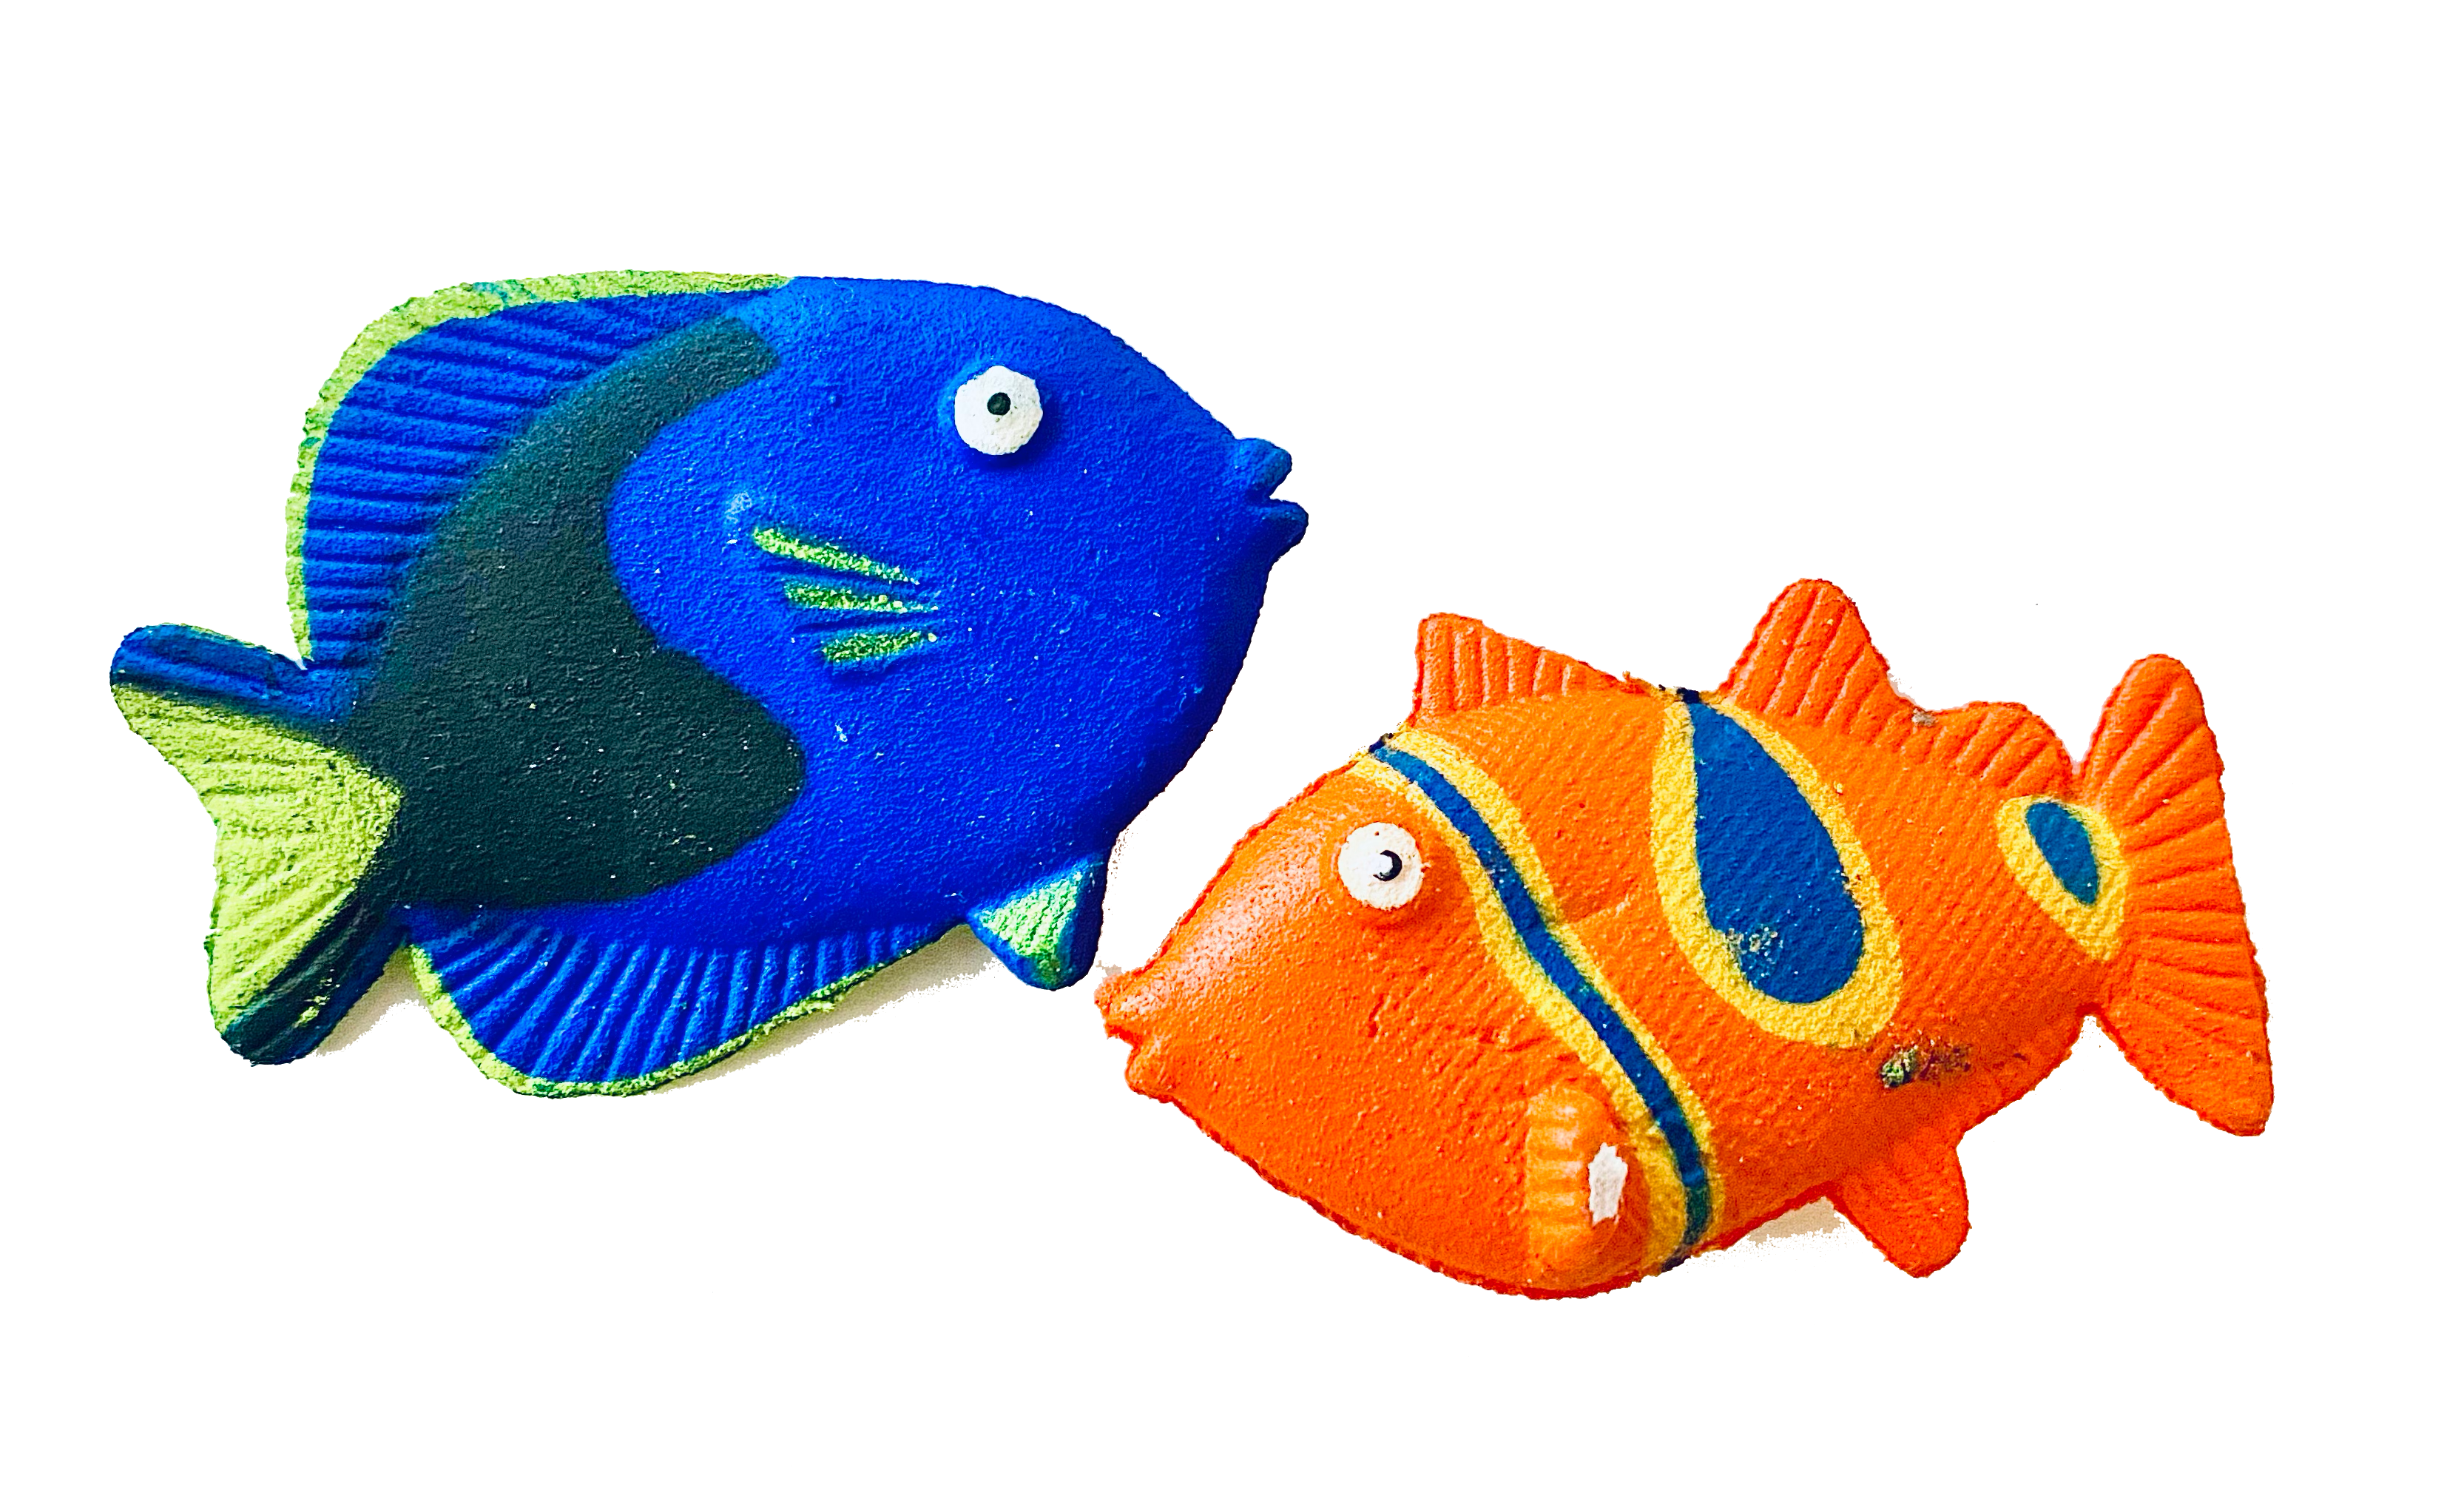 Growing Fish Amazing Color Expanding in Water Science Toy